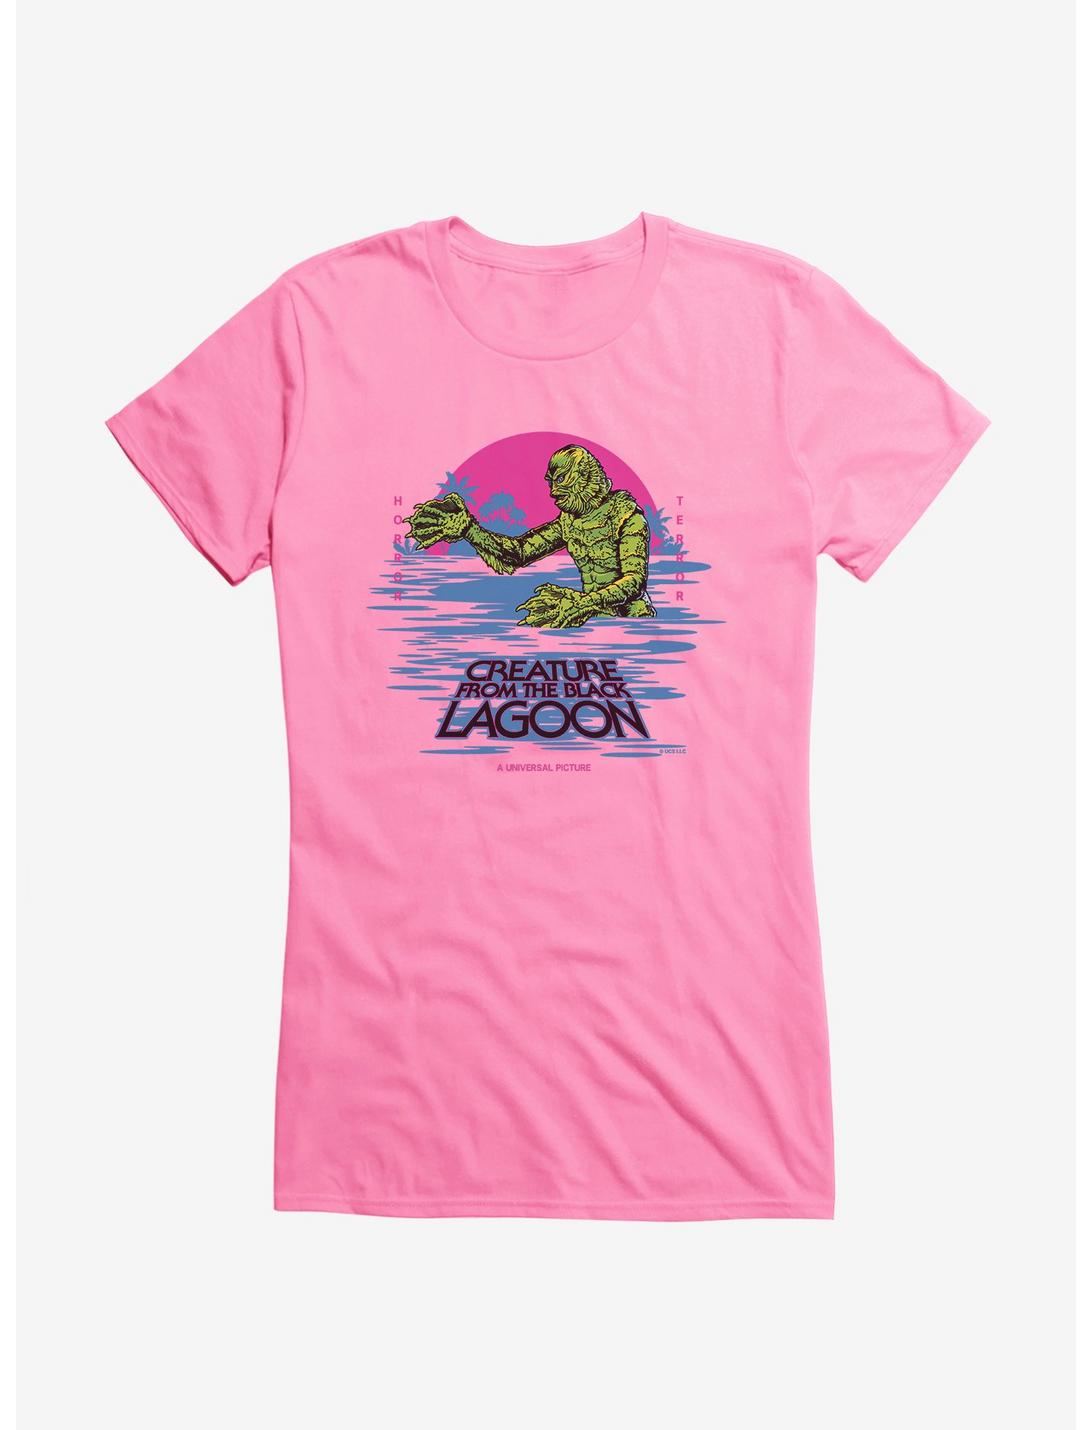 Creature From The Black Lagoon Pastel Title Art Girls T-Shirt, CHARITY PINK, hi-res